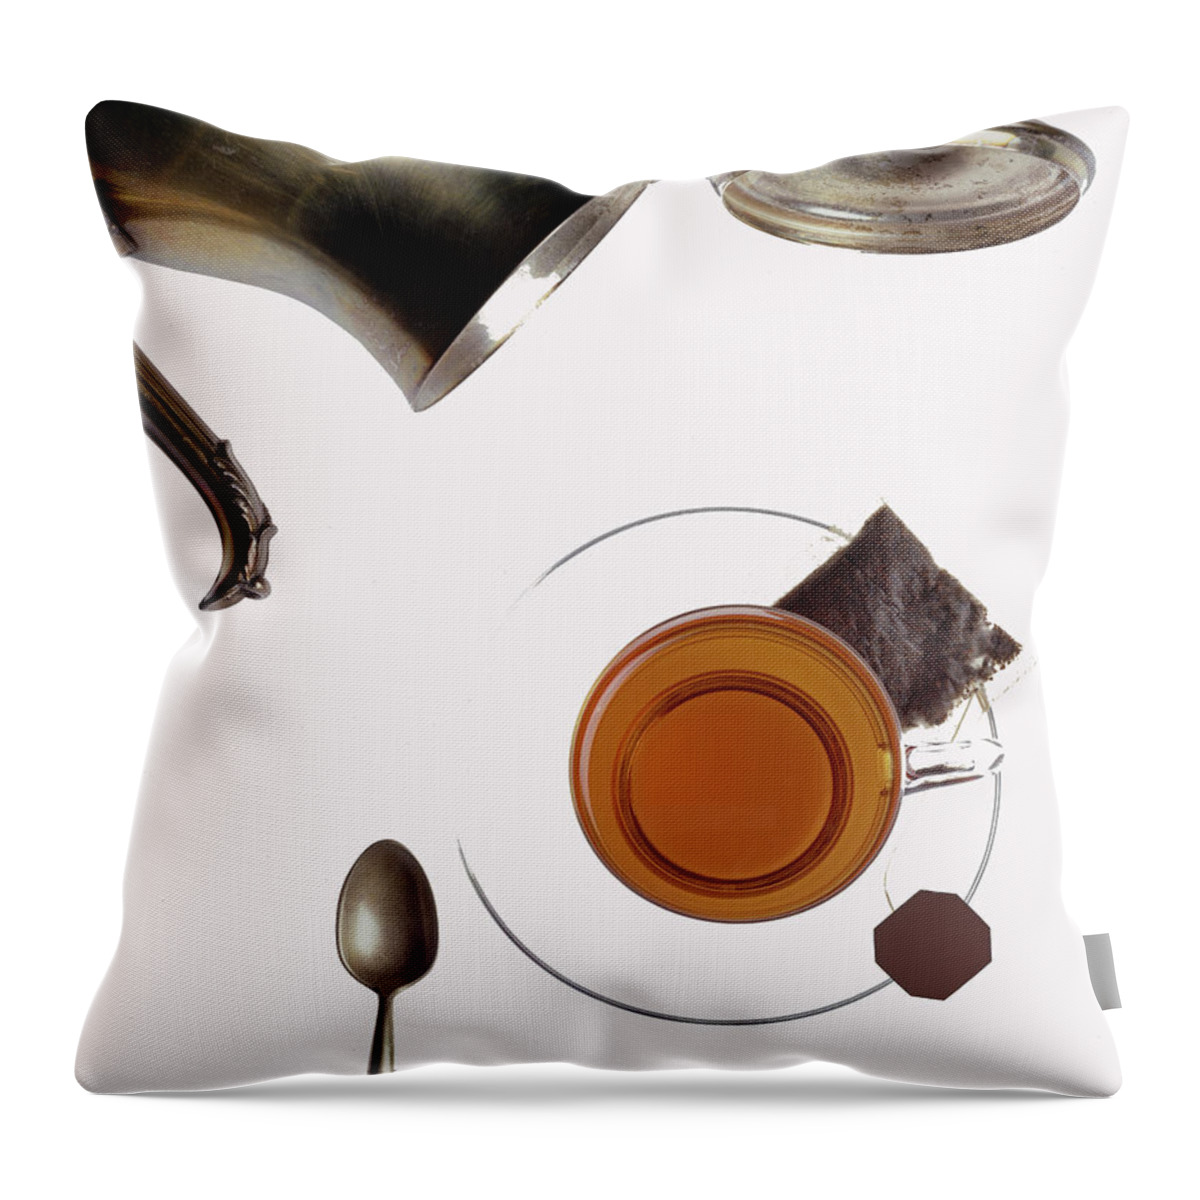 Photo Decor Throw Pillow featuring the photograph Tea For One by Steven Huszar